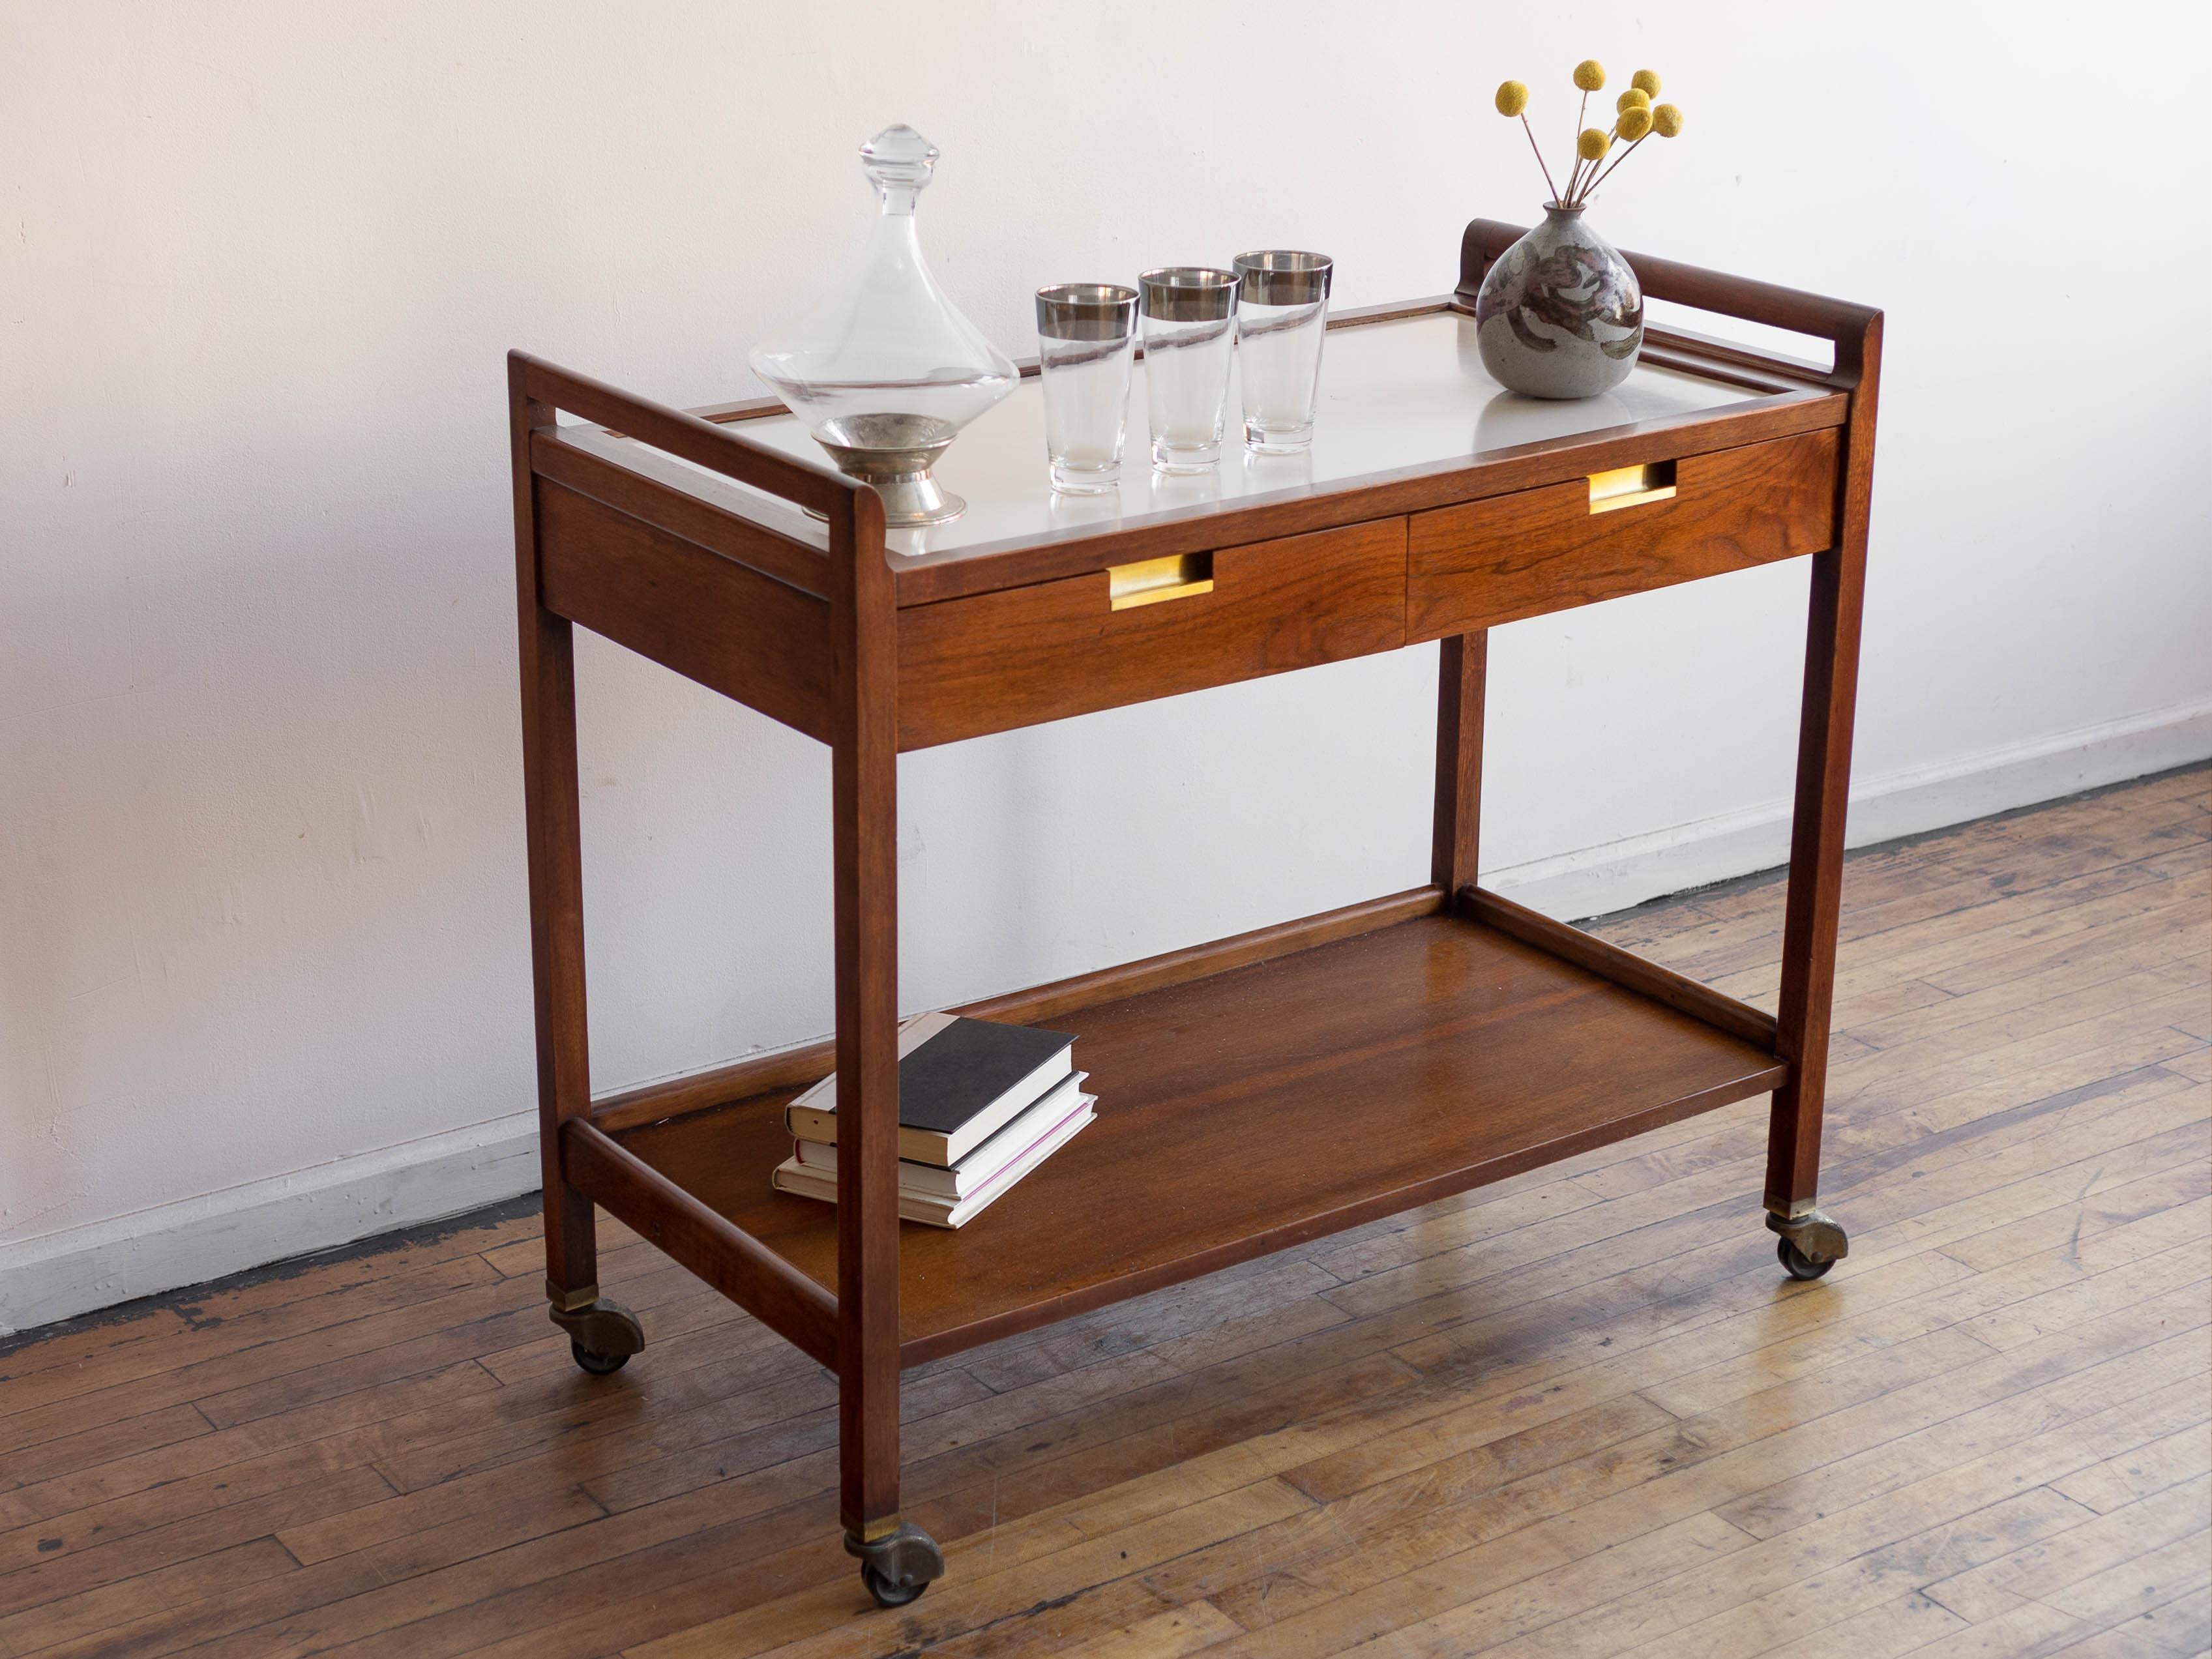 38” x 18.75” x 33.5”H overall; top surface is 31”H, bottom shelf height is 17.75”H

This vintage walnut American of Martinsville Accord bar cart is a stunning piece of furniture that is both stylish and practical. Its black walnut veneer and ivory